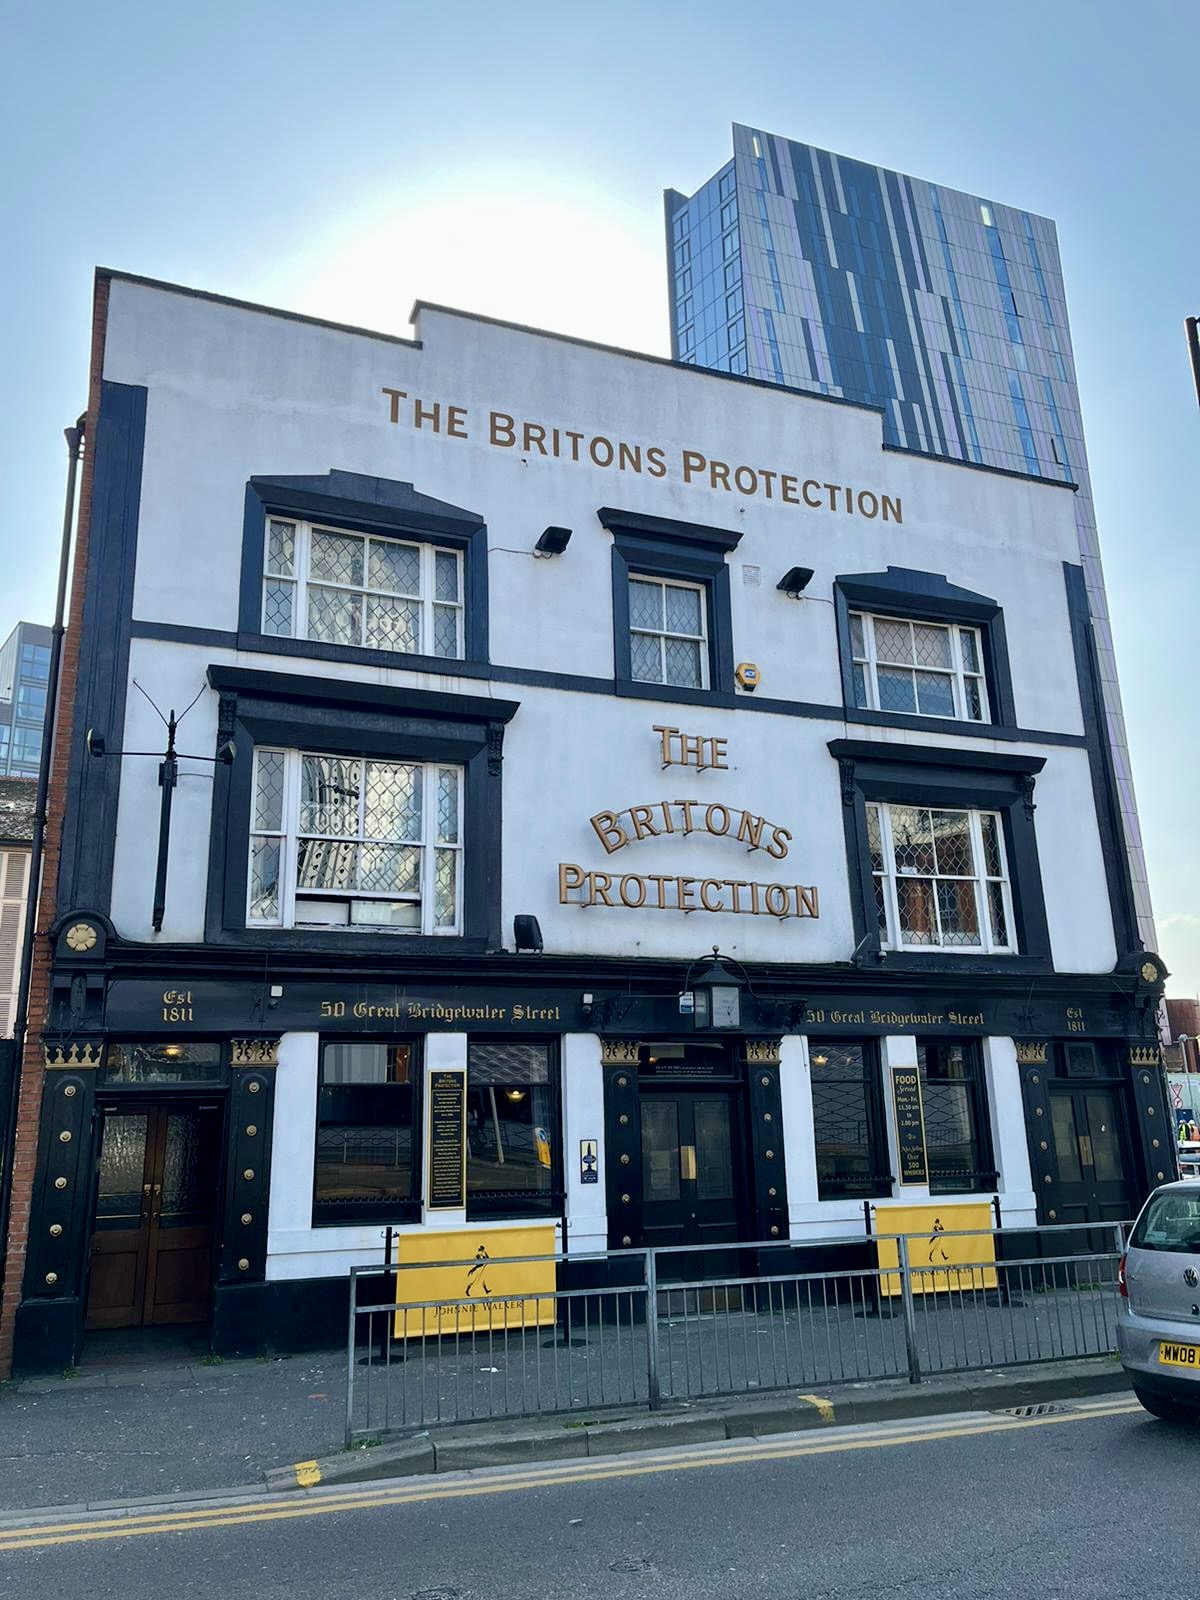 The Britons Protection. Credit: The Manc Group